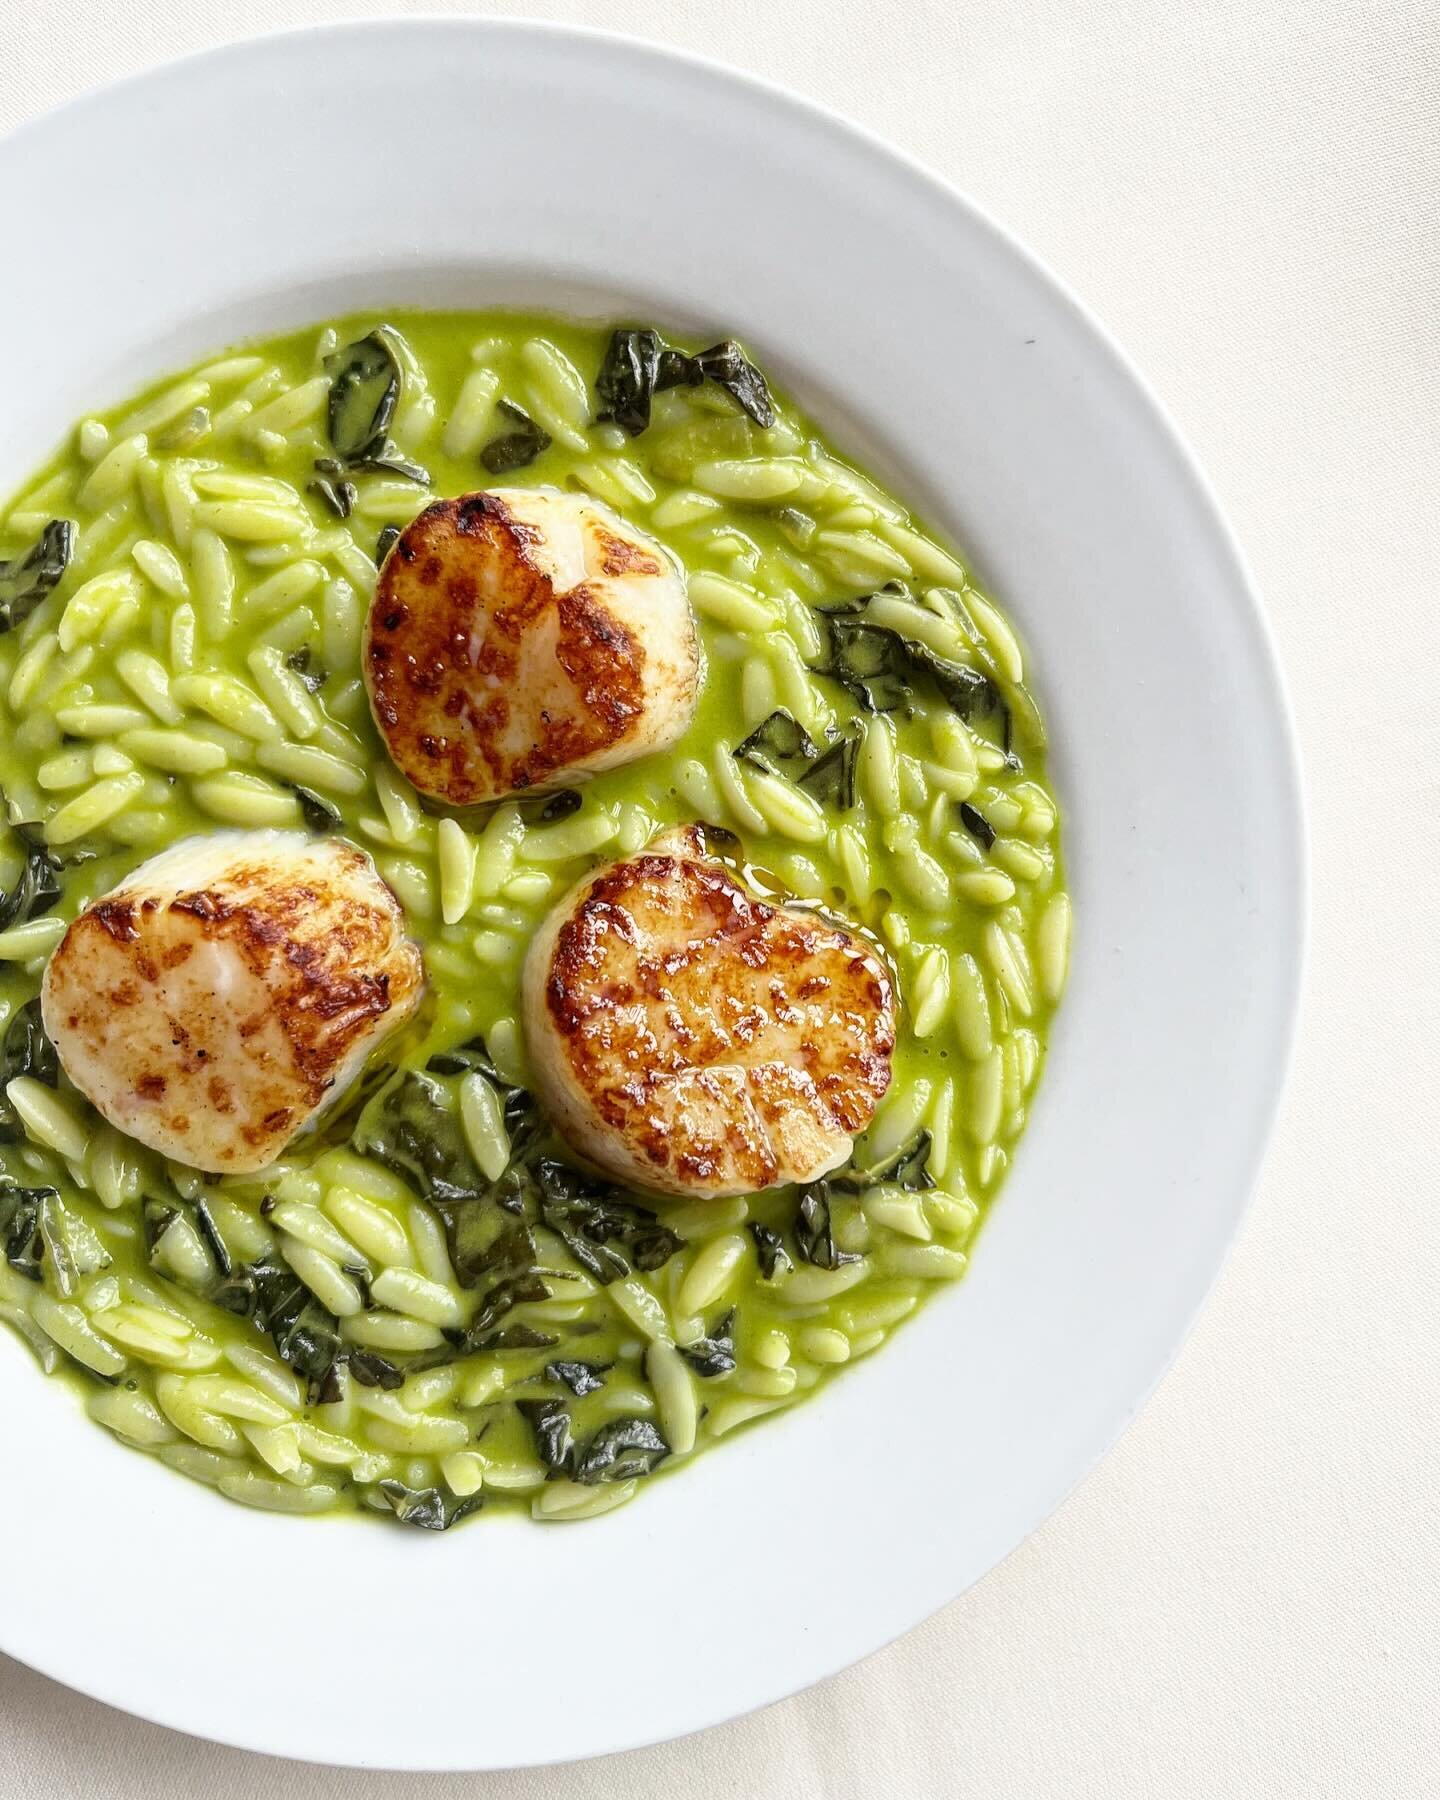 Grilled scallops sitting so pretty in an herby green orzotto :-p